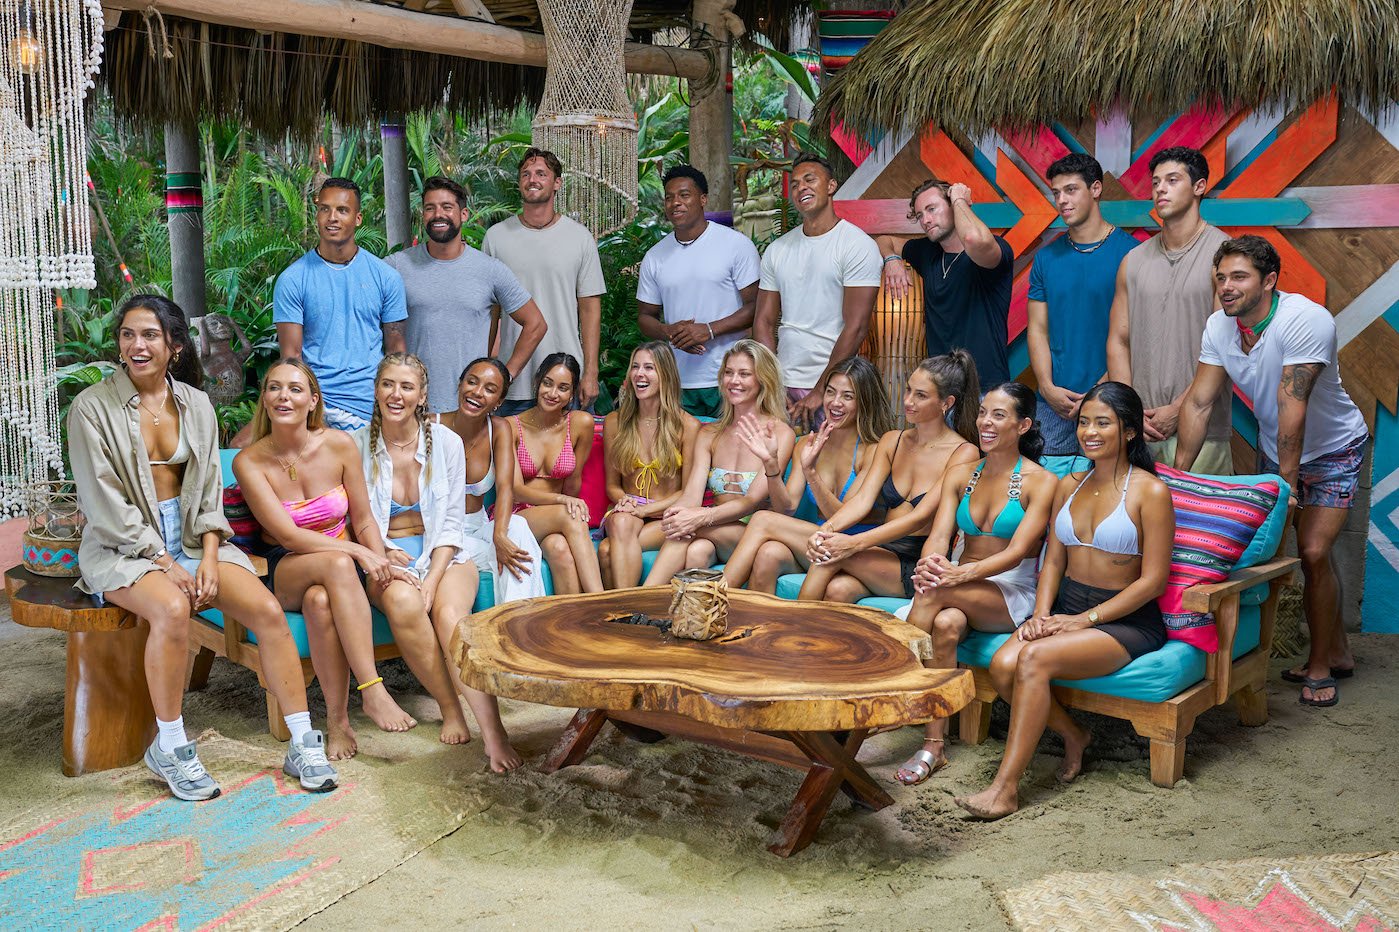 The 'Bachelor in Paradise' Season 8 cast sitting together